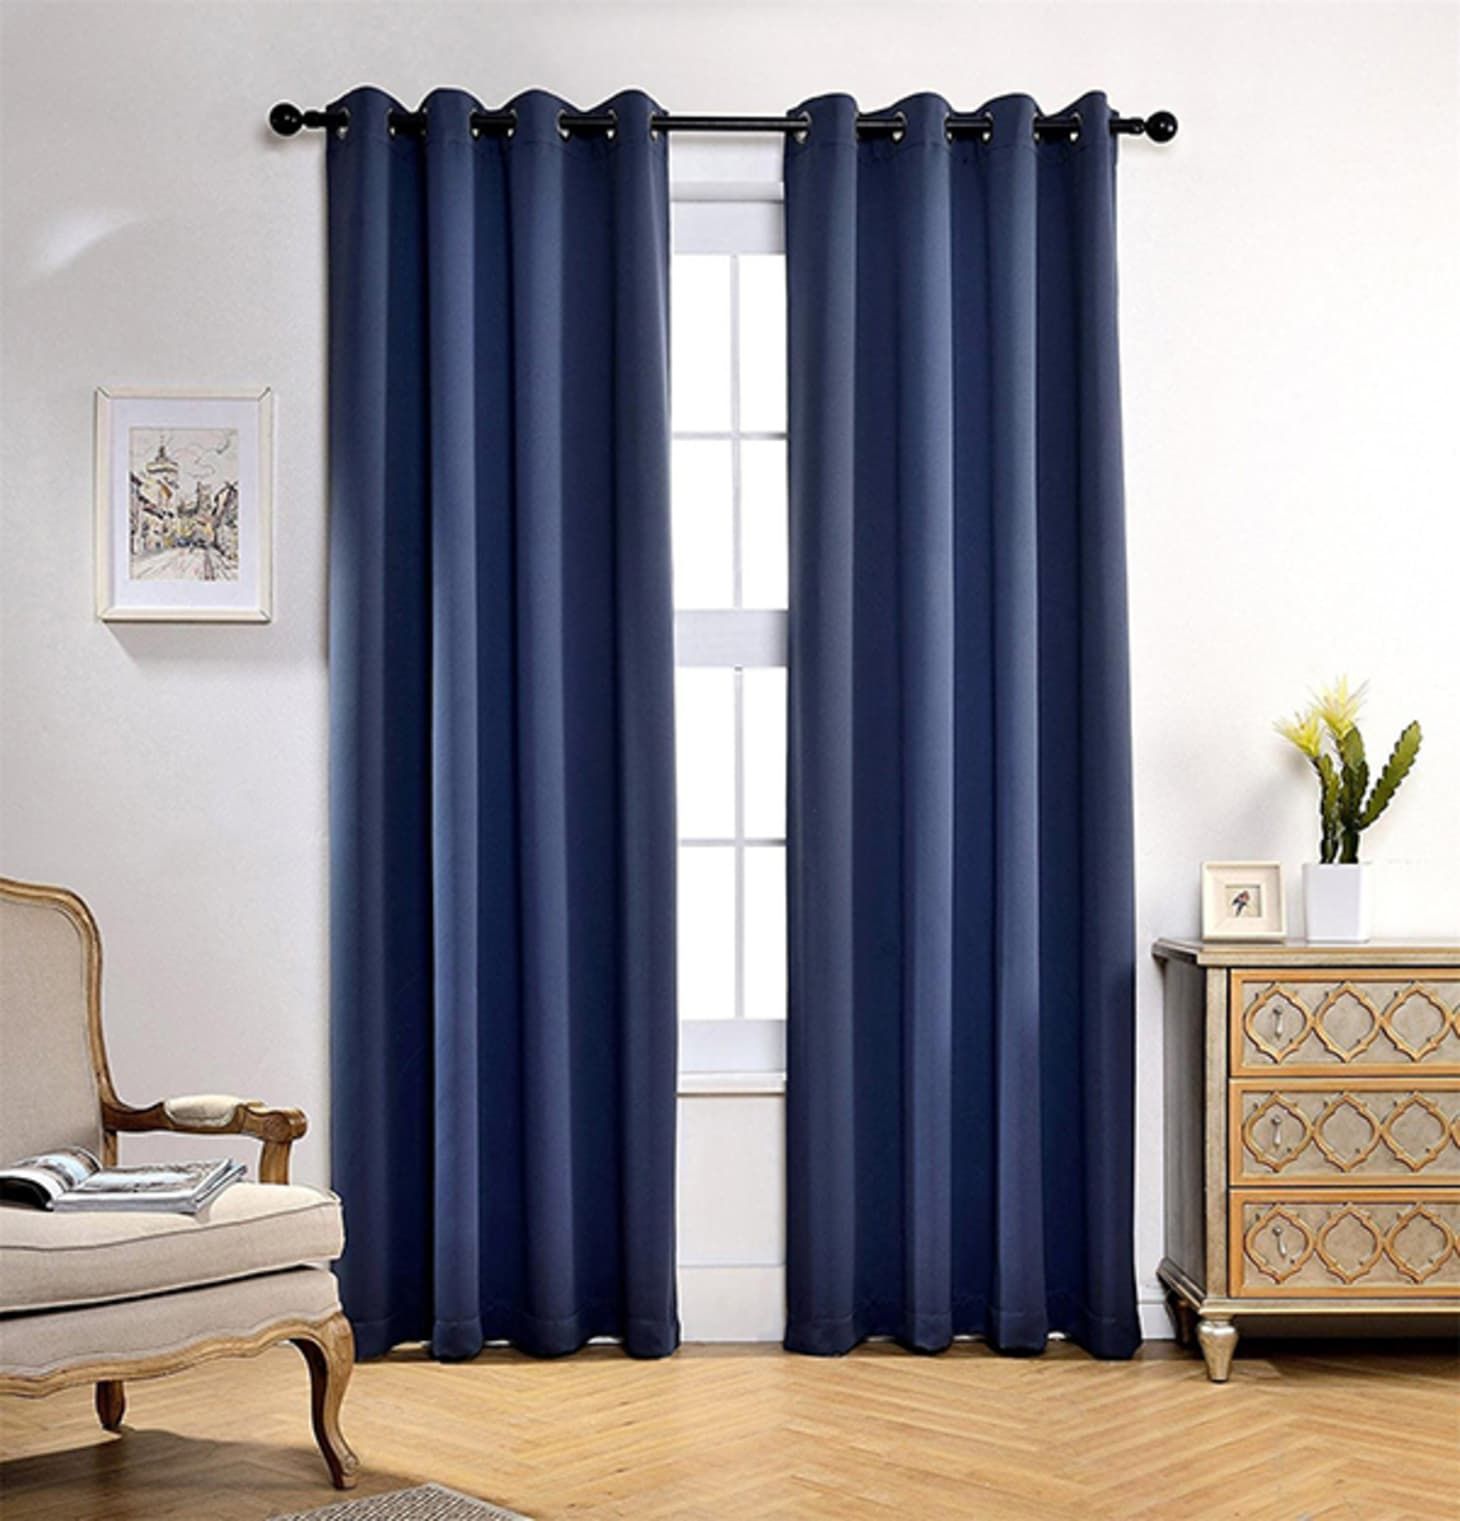 Best Insulated Blackout Curtains | Apartment Therapy With Regard To Edward Moroccan Pattern Room Darkening Curtain Panel Pairs (View 17 of 20)